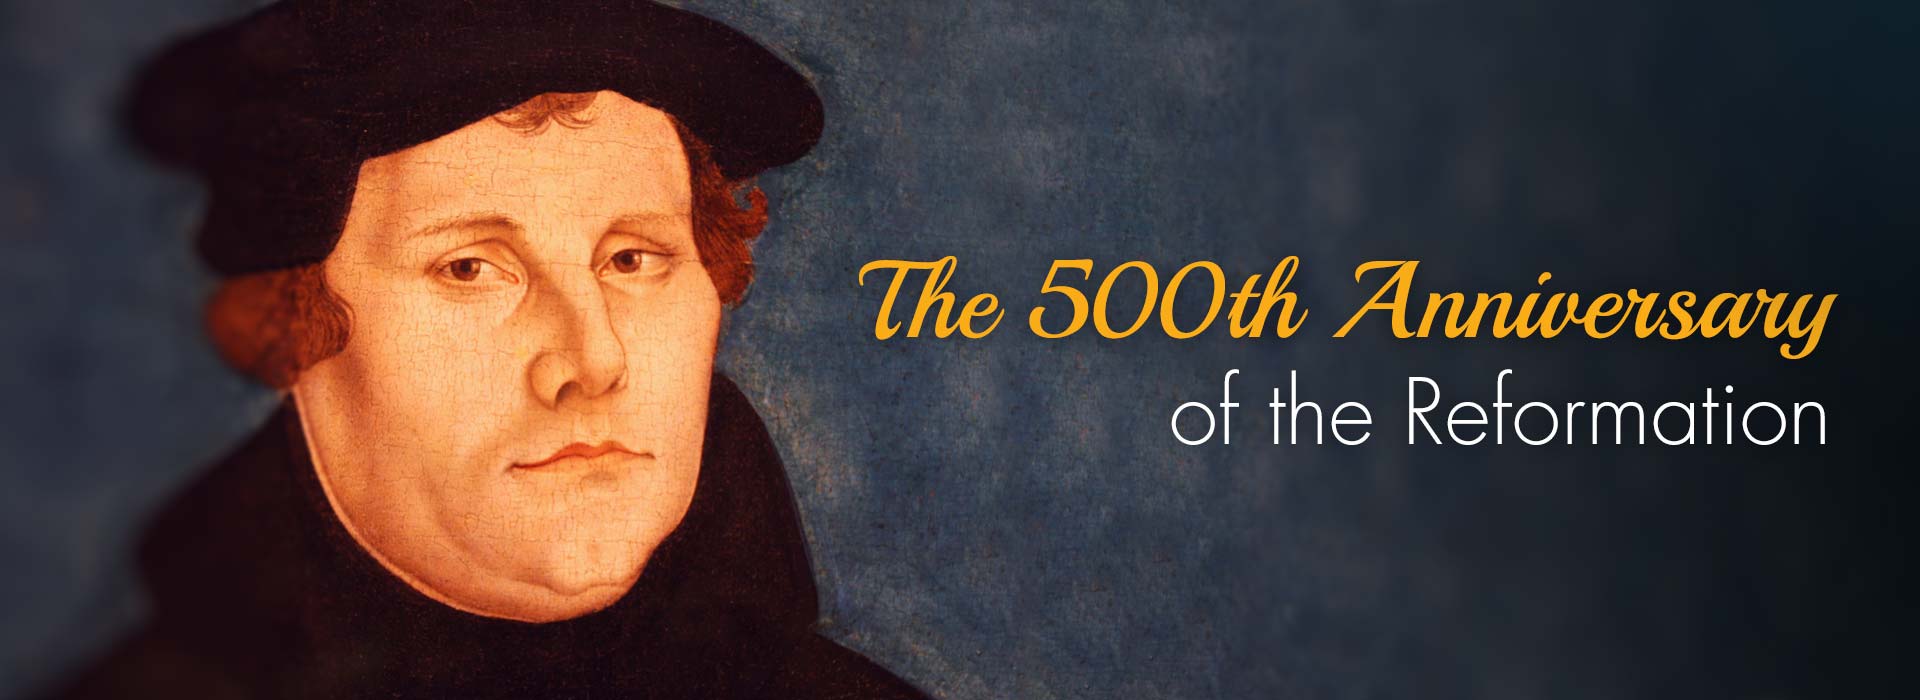 500th-anniversary-of-the-reformation.jpg